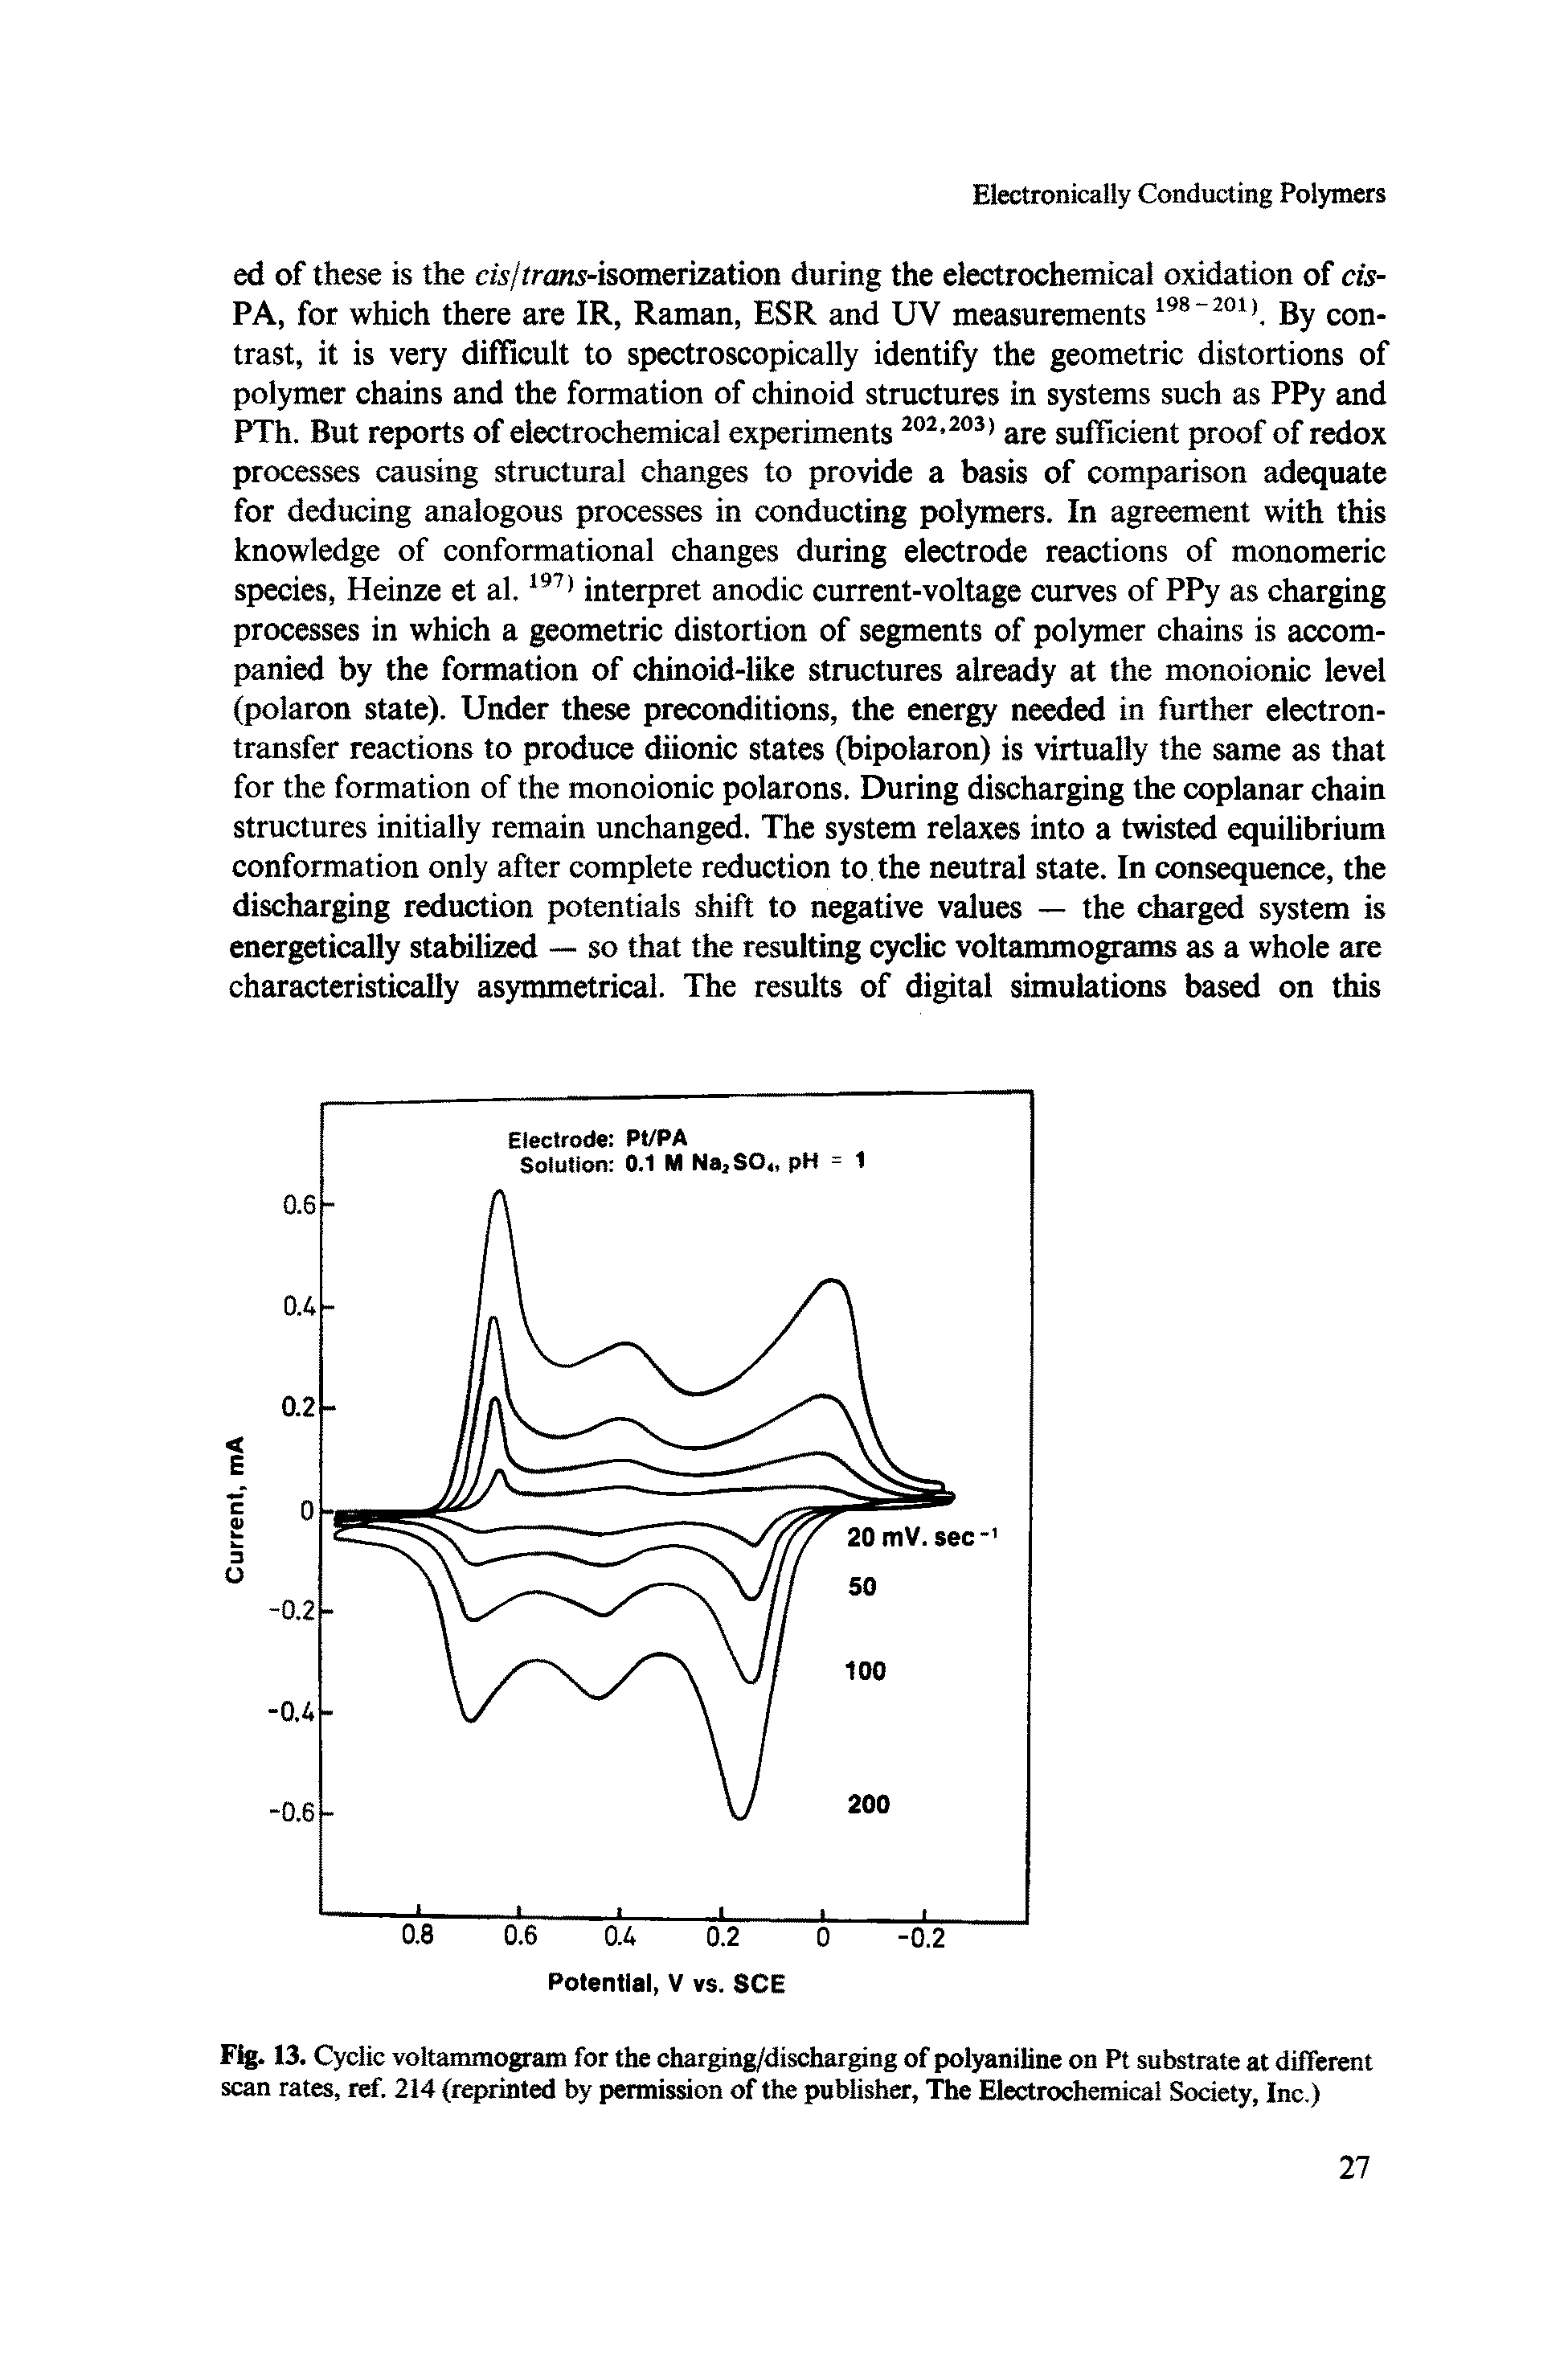 Fig. 13. Cyclic voltammograin for the charging/discharging of polyaniline on Pt substrate at different scan rates, ref. 214 (reprinted by permission of the publisher, The Electrochemical Society, Inc.)...